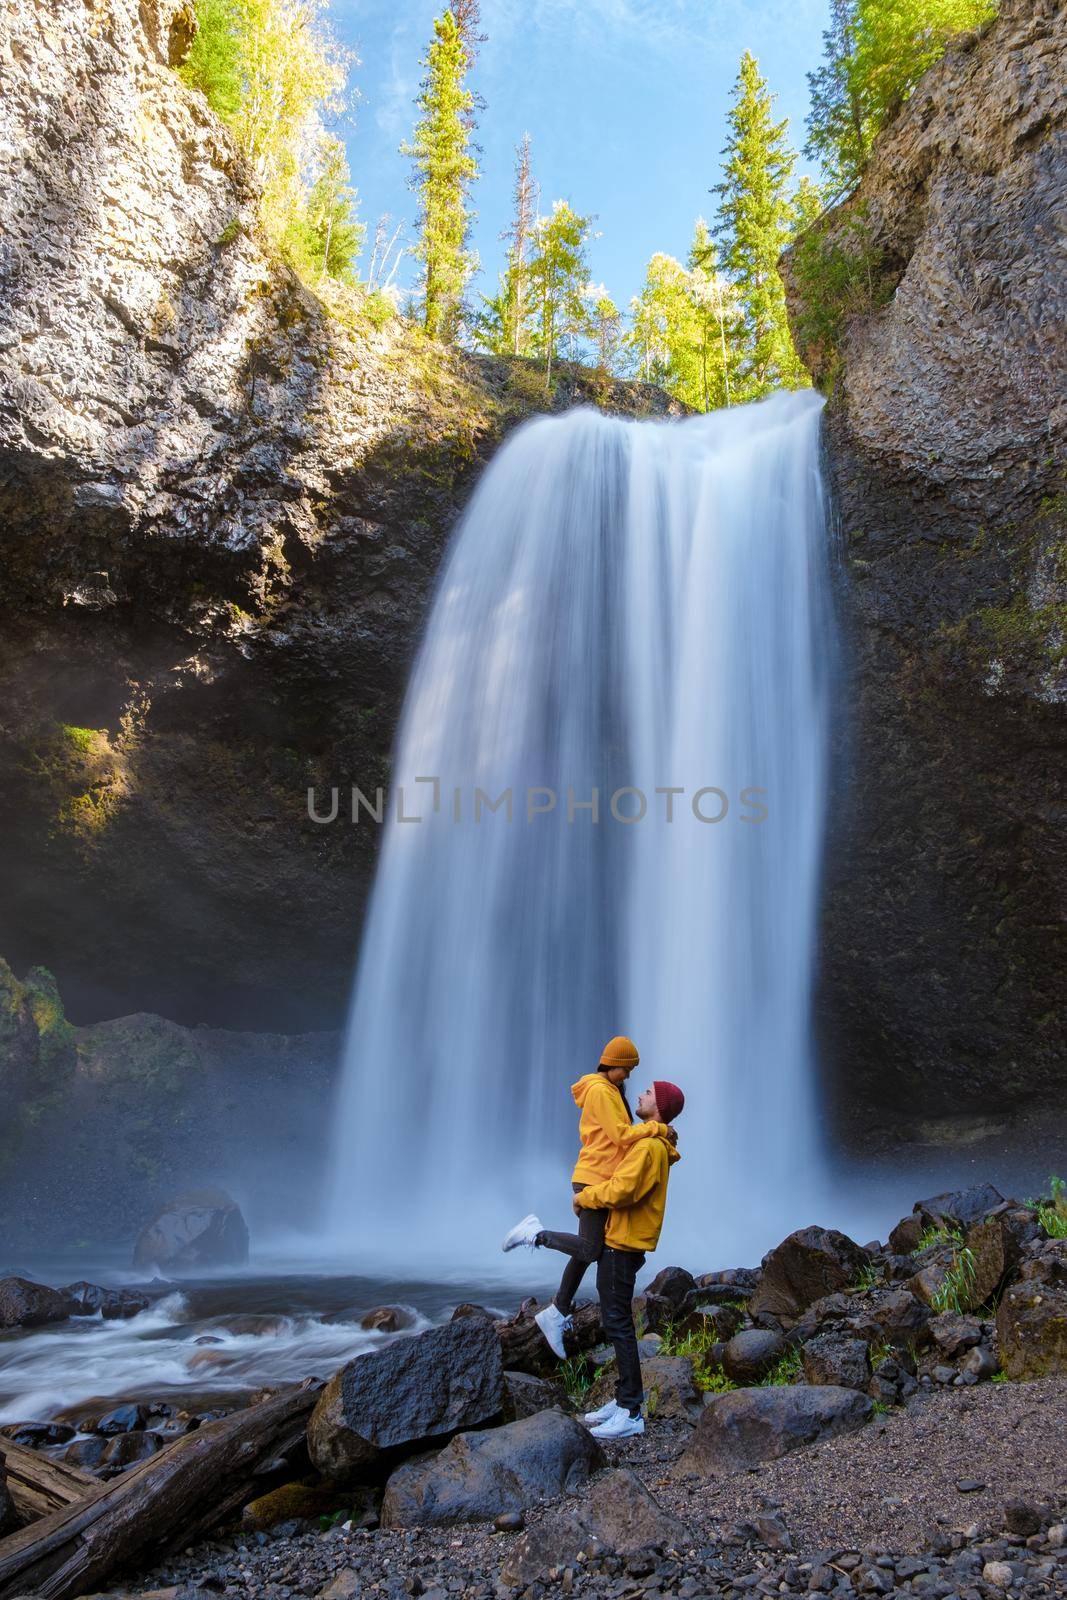 Moul Falls Canada is a Beautiful waterfall in Canada, couple of visits to Moul Falls, the most famous waterfall in Wells Gray Provincial Park. a couple of men and women standing by a waterfall